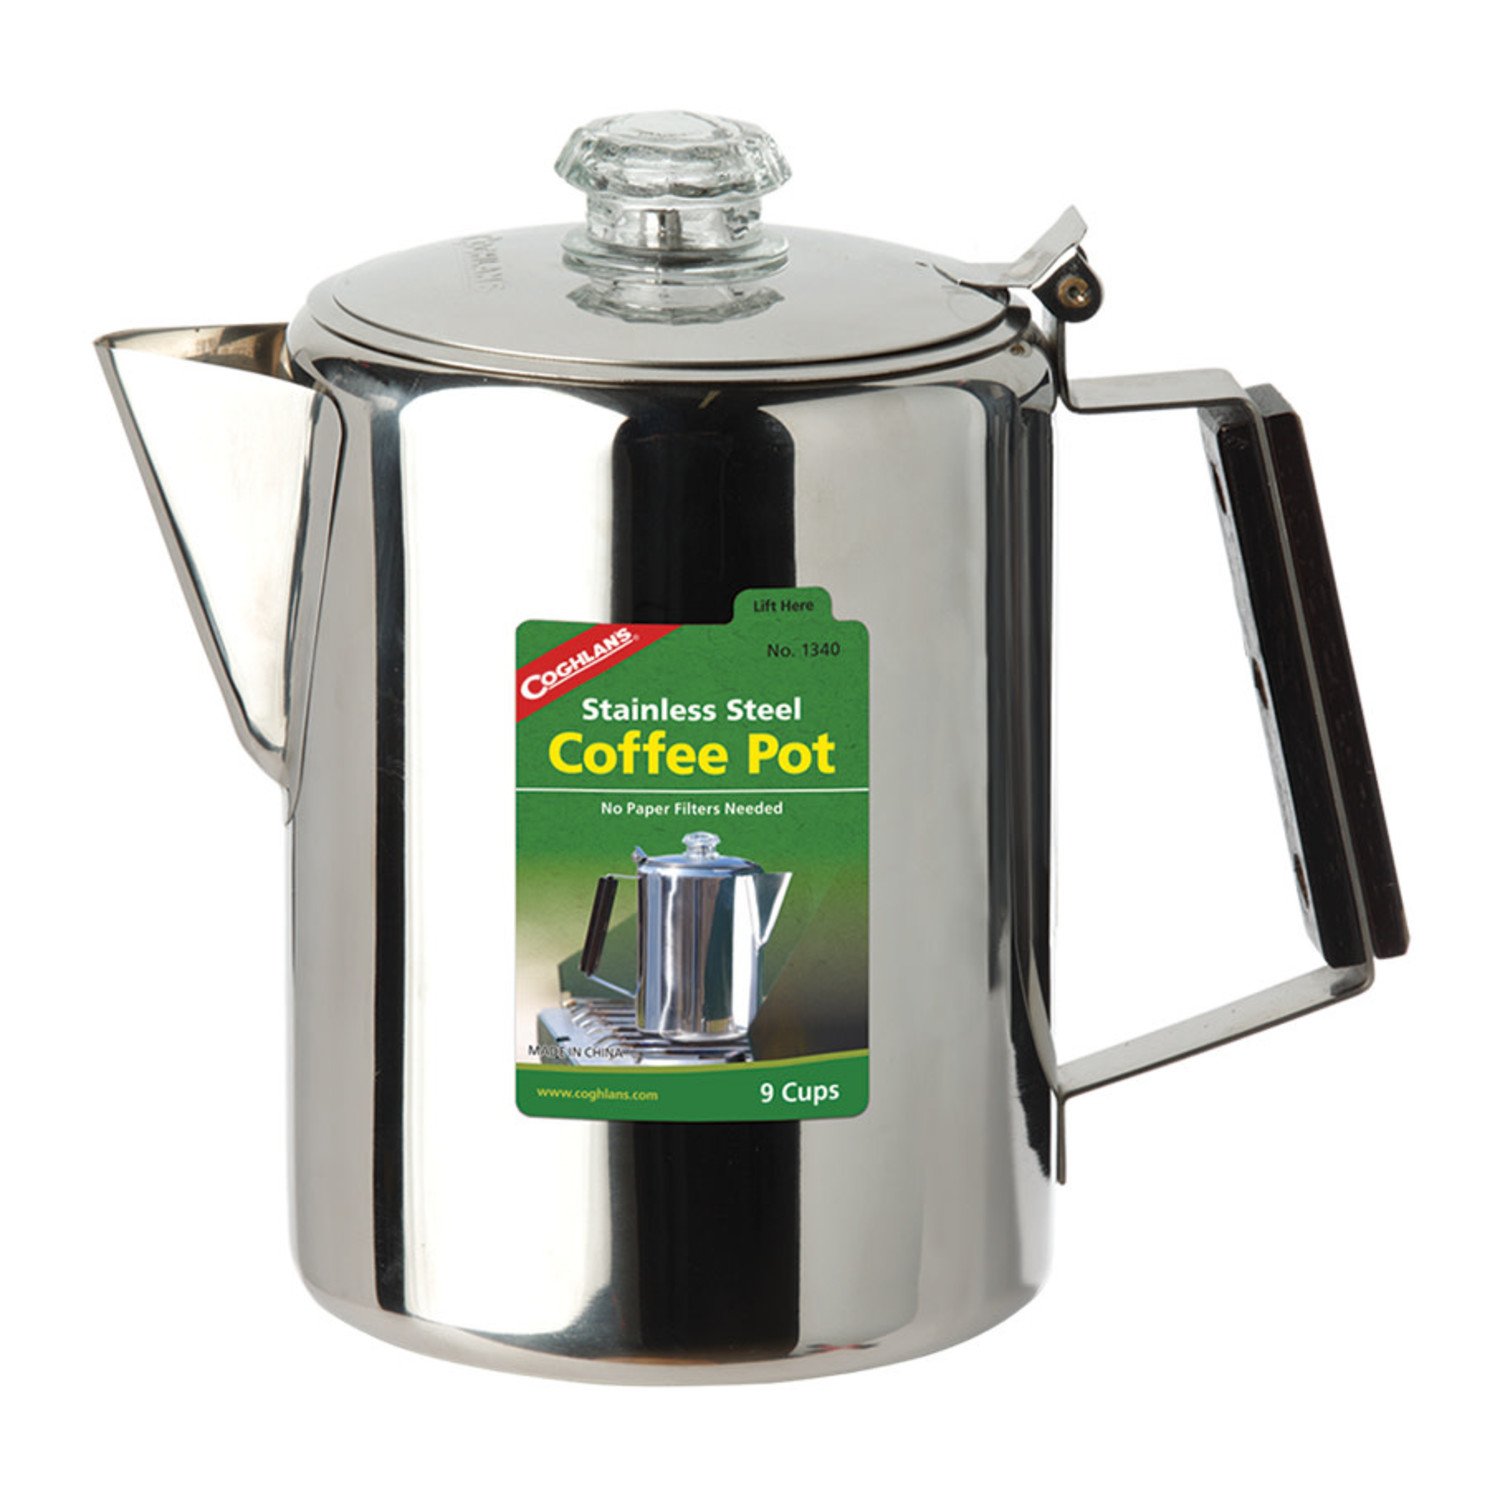 Coghlan's Stainless Steel Coffee Pot 9 Cup - True Outdoors